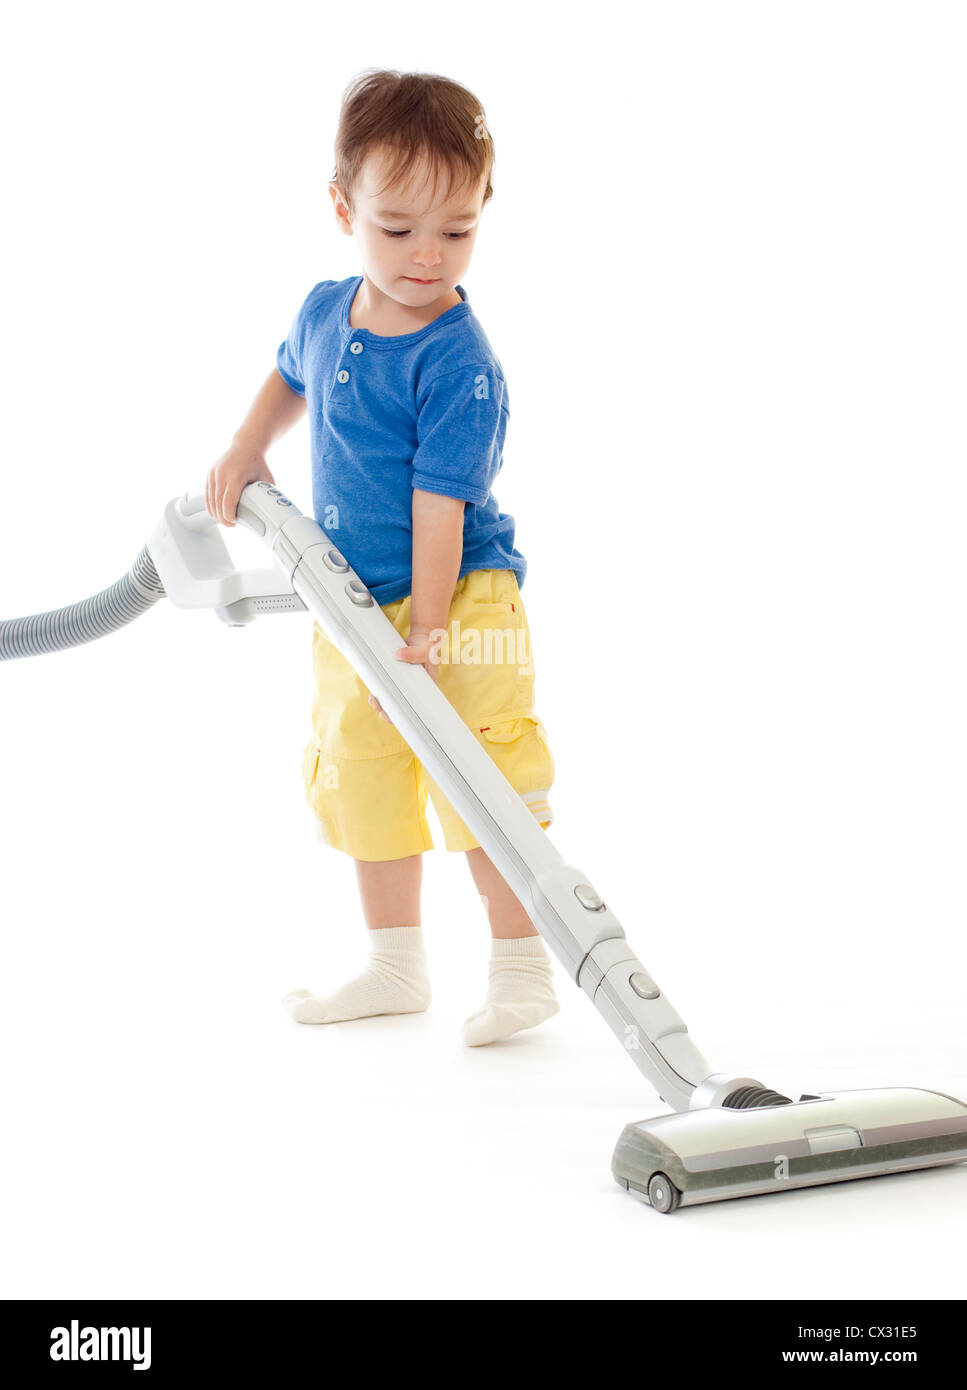 Toddler is cleaning room with vacuum cleaner isolated on white Stock Photo